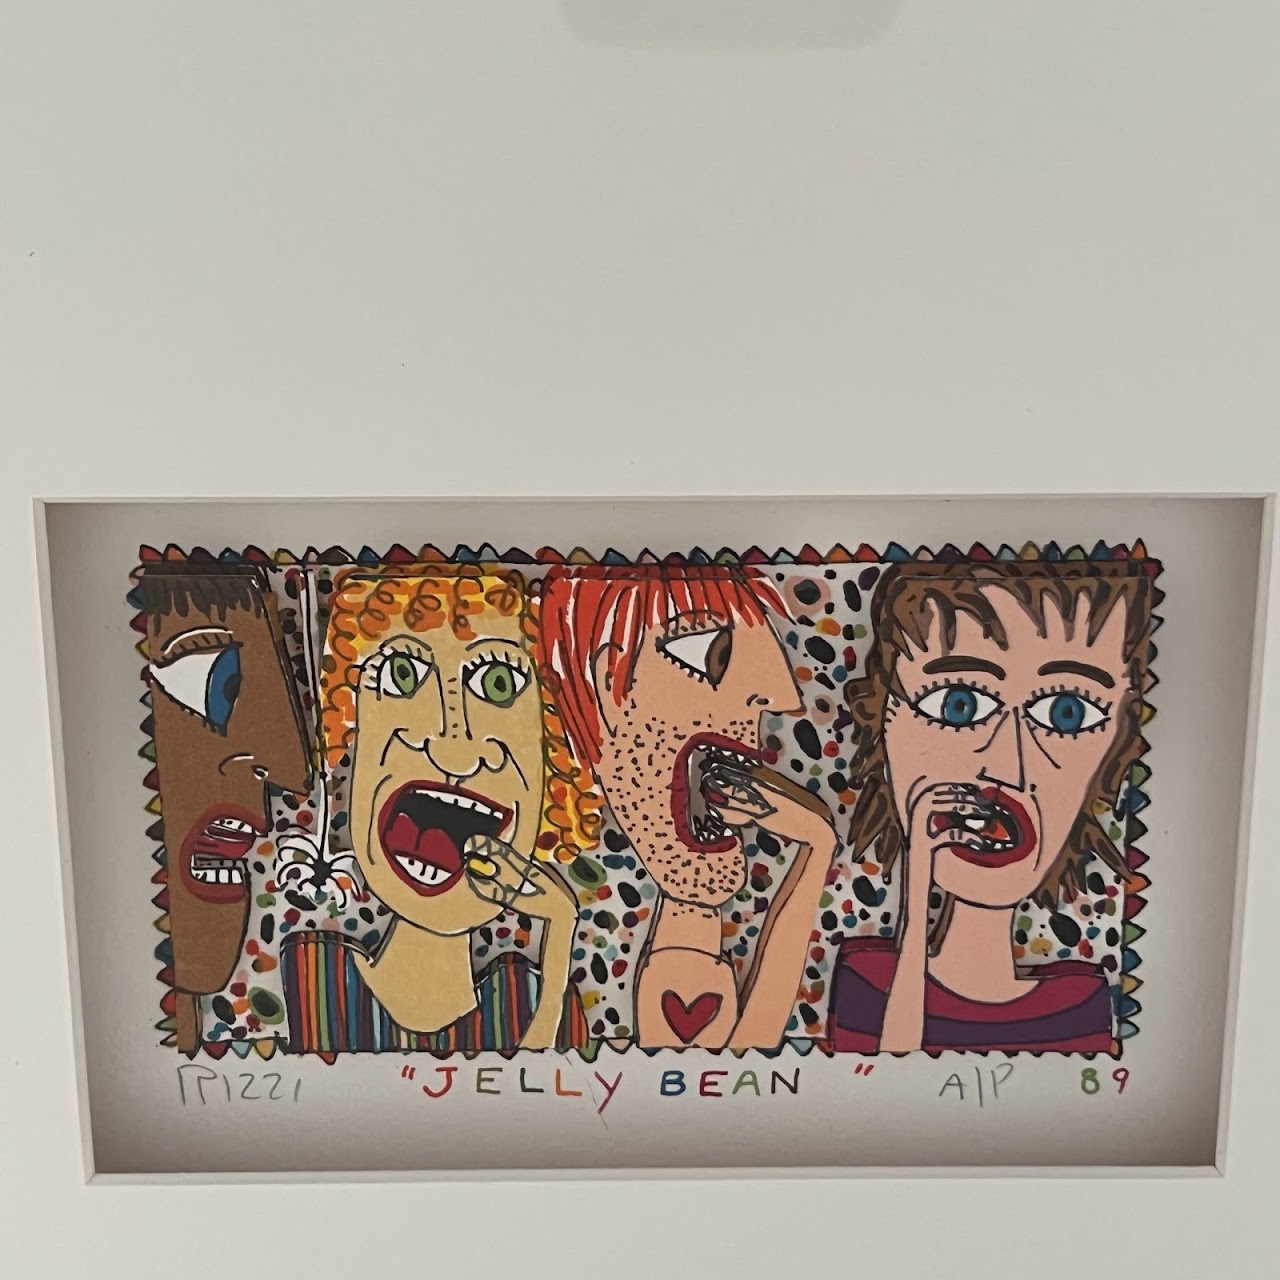 James Rizzi 'Jelly Bean' Signed 3D Lithograph